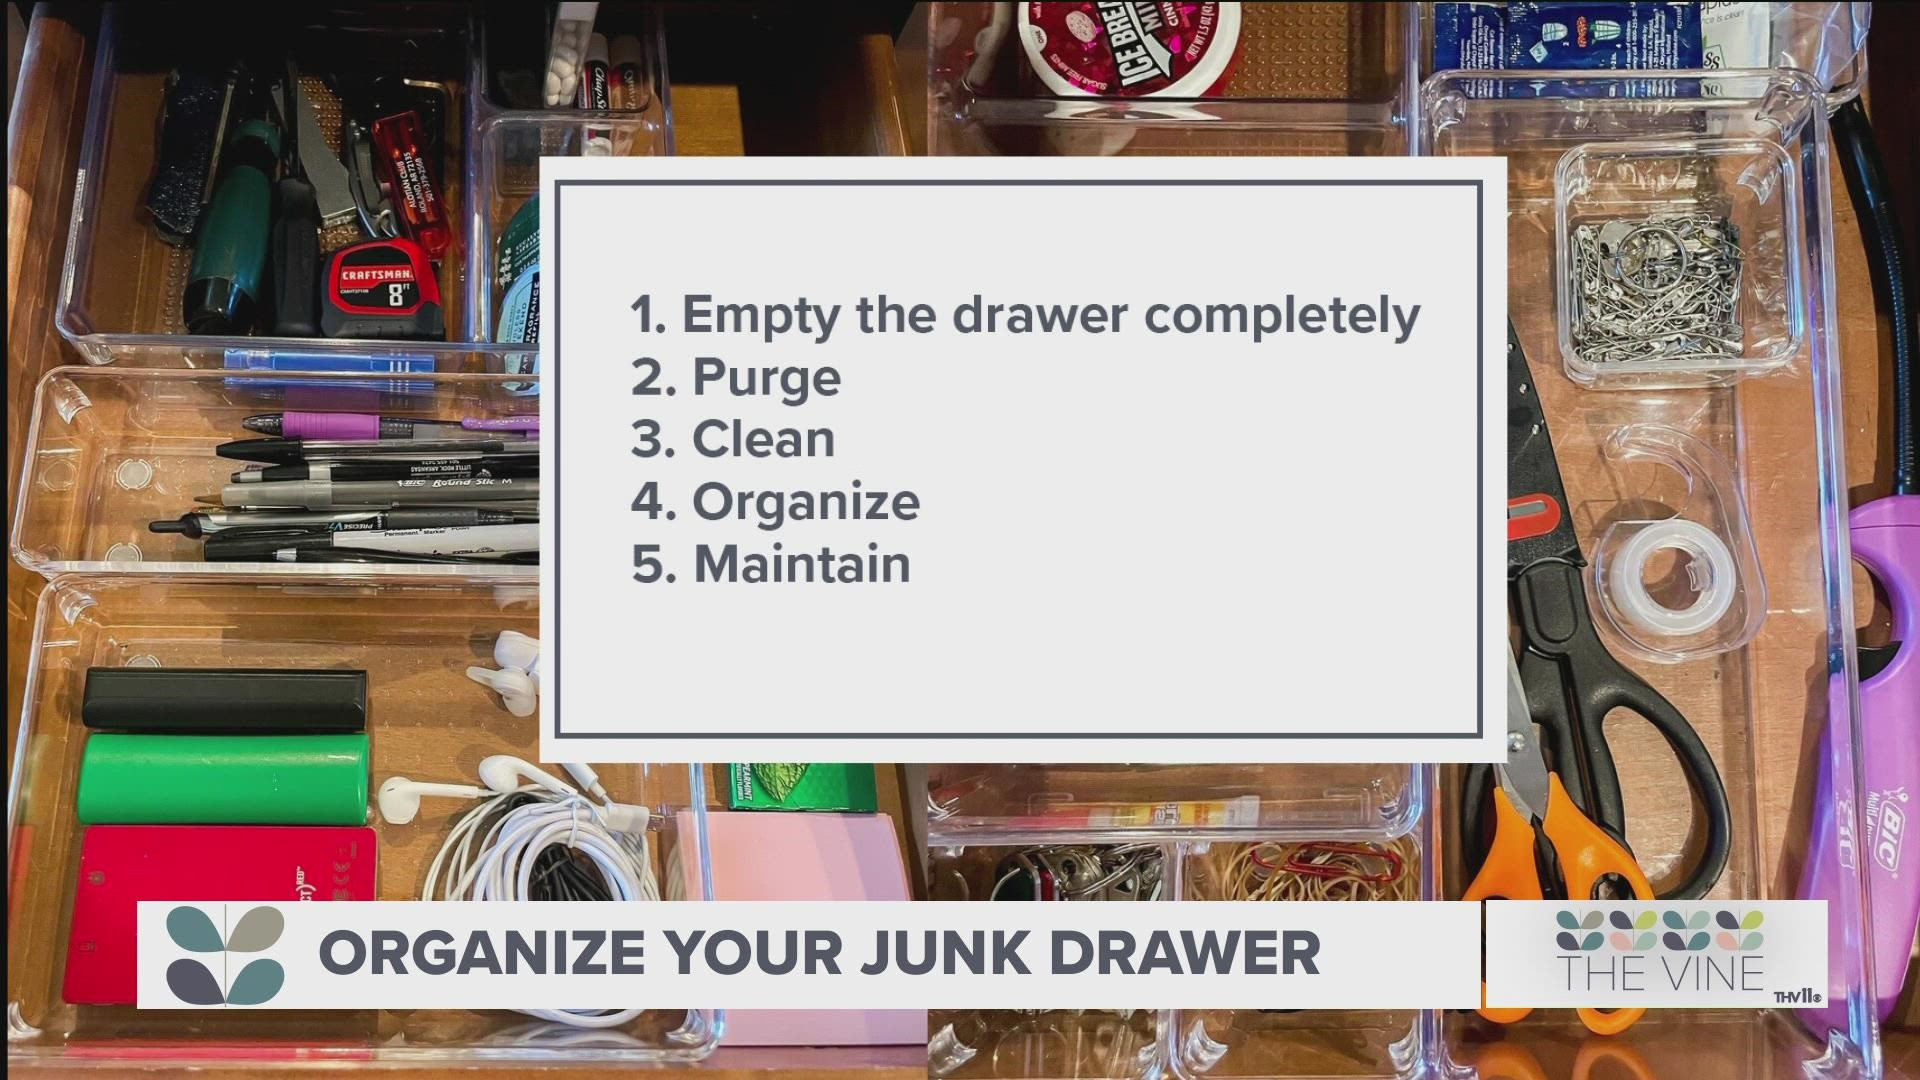 Paige Shepard with Shepard Organizing talks us through 5 steps to make your junk drawer work better.